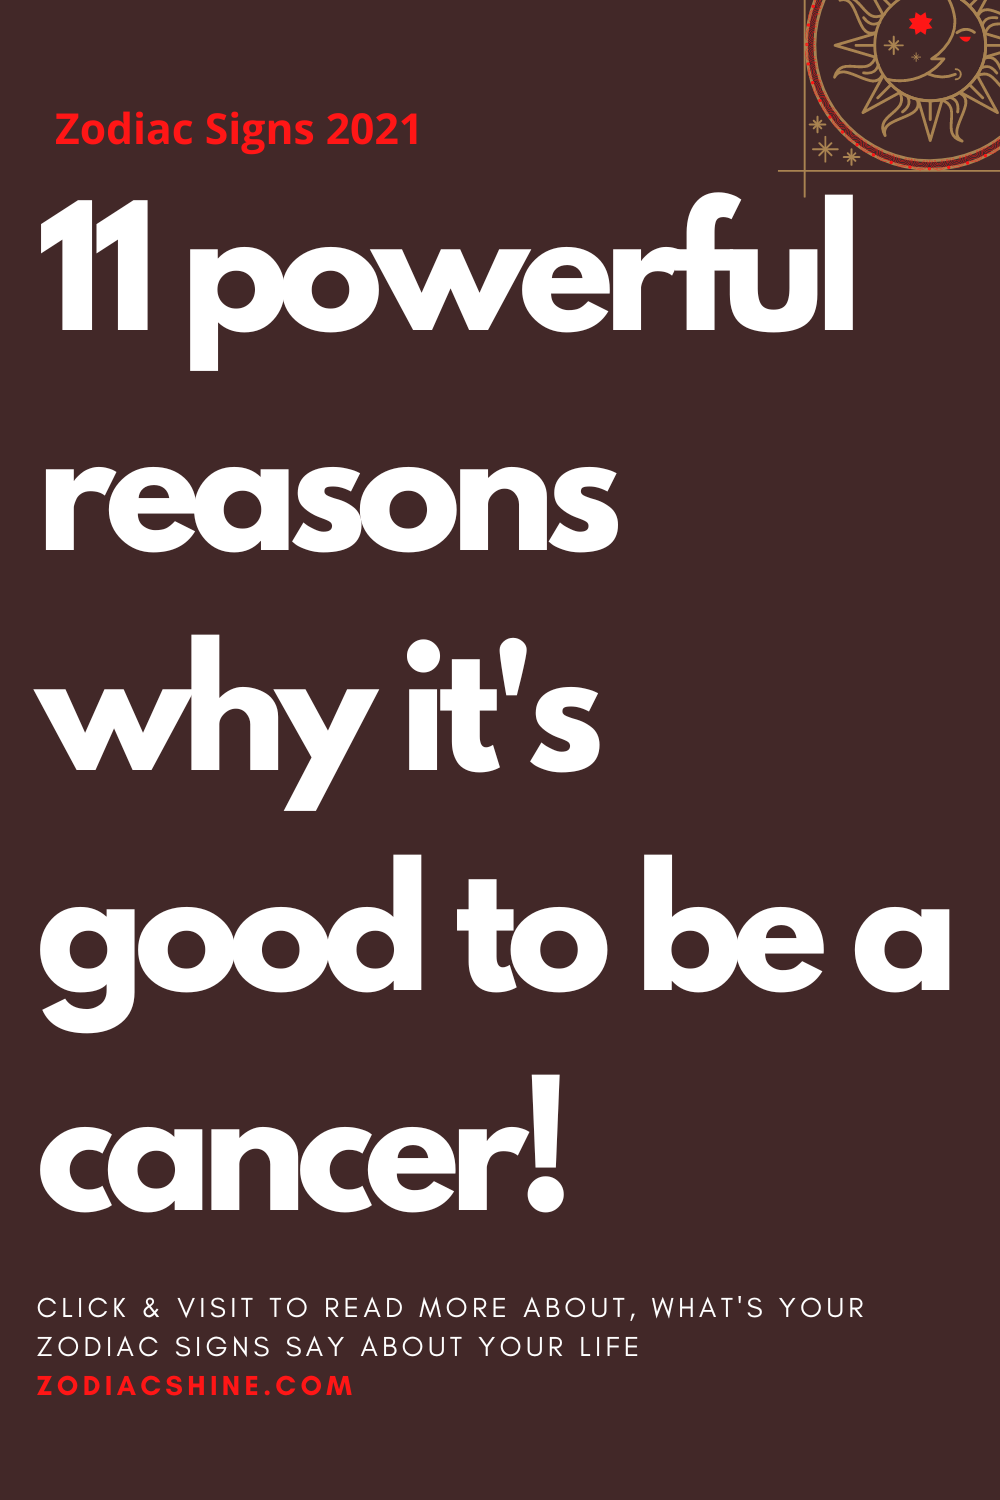 11 powerful reasons why it's good to be a cancer!